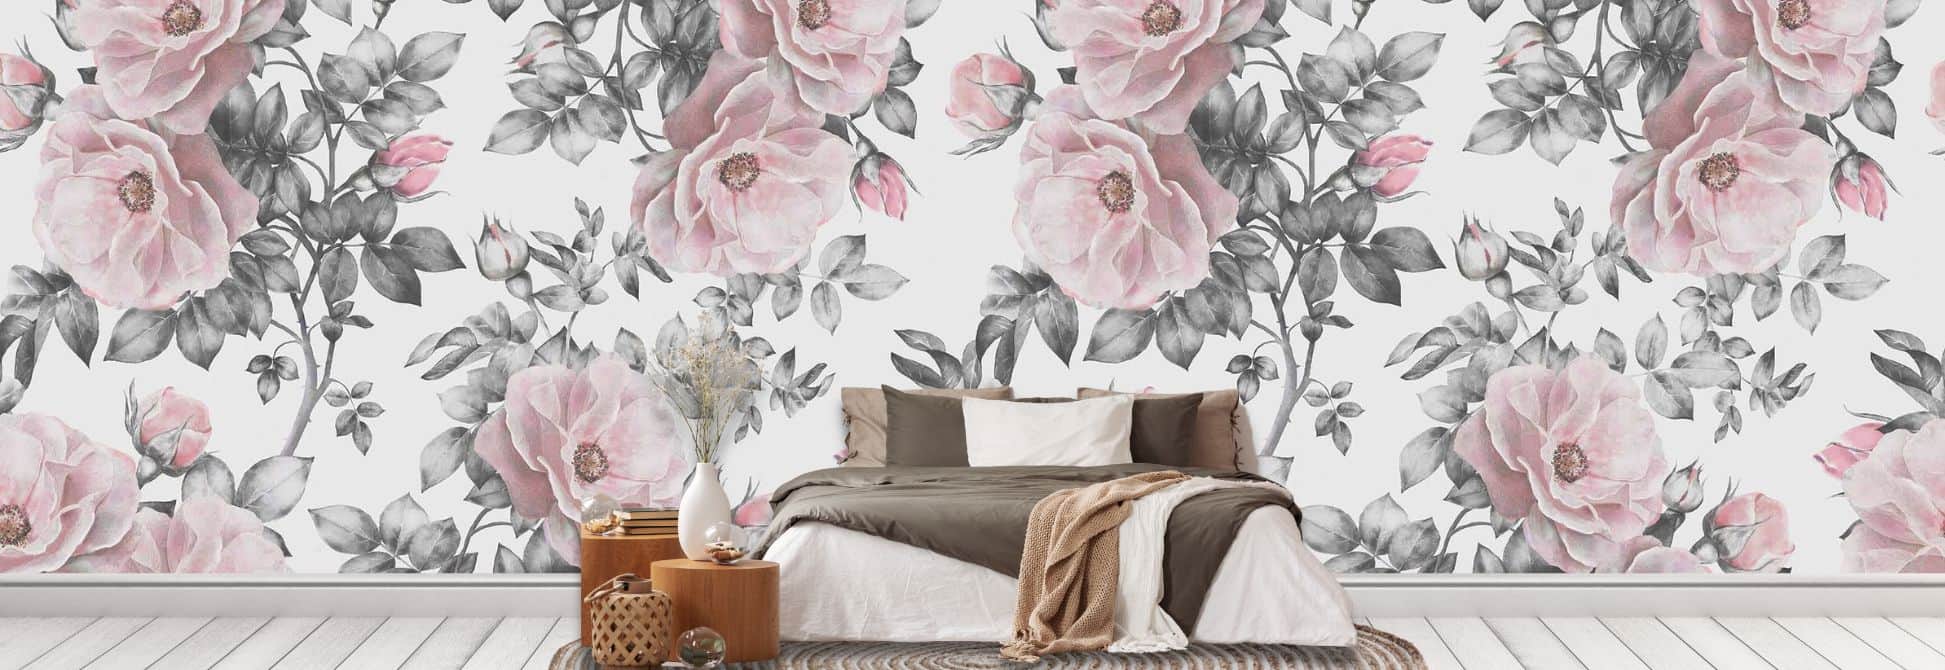 Shop Rose Wallpaper and Rose Wall Murals, like this pink floral design in a bedroom, from About Murals.